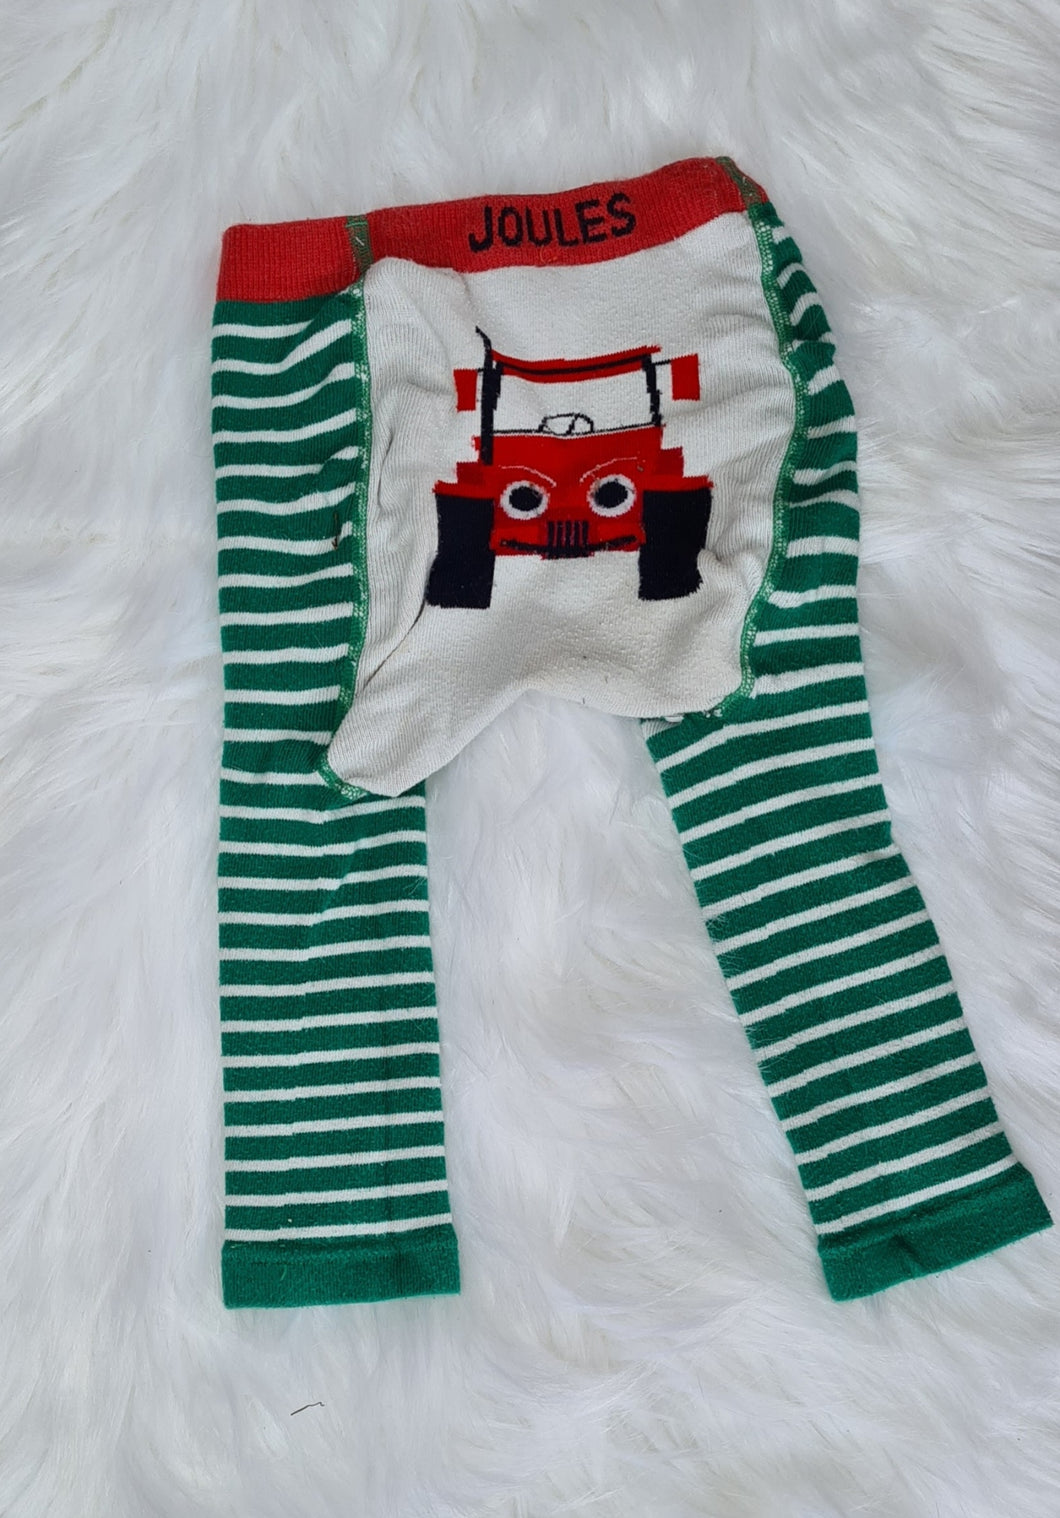 Boys 9-12 Months - Joules - Green and Tractor Leggings